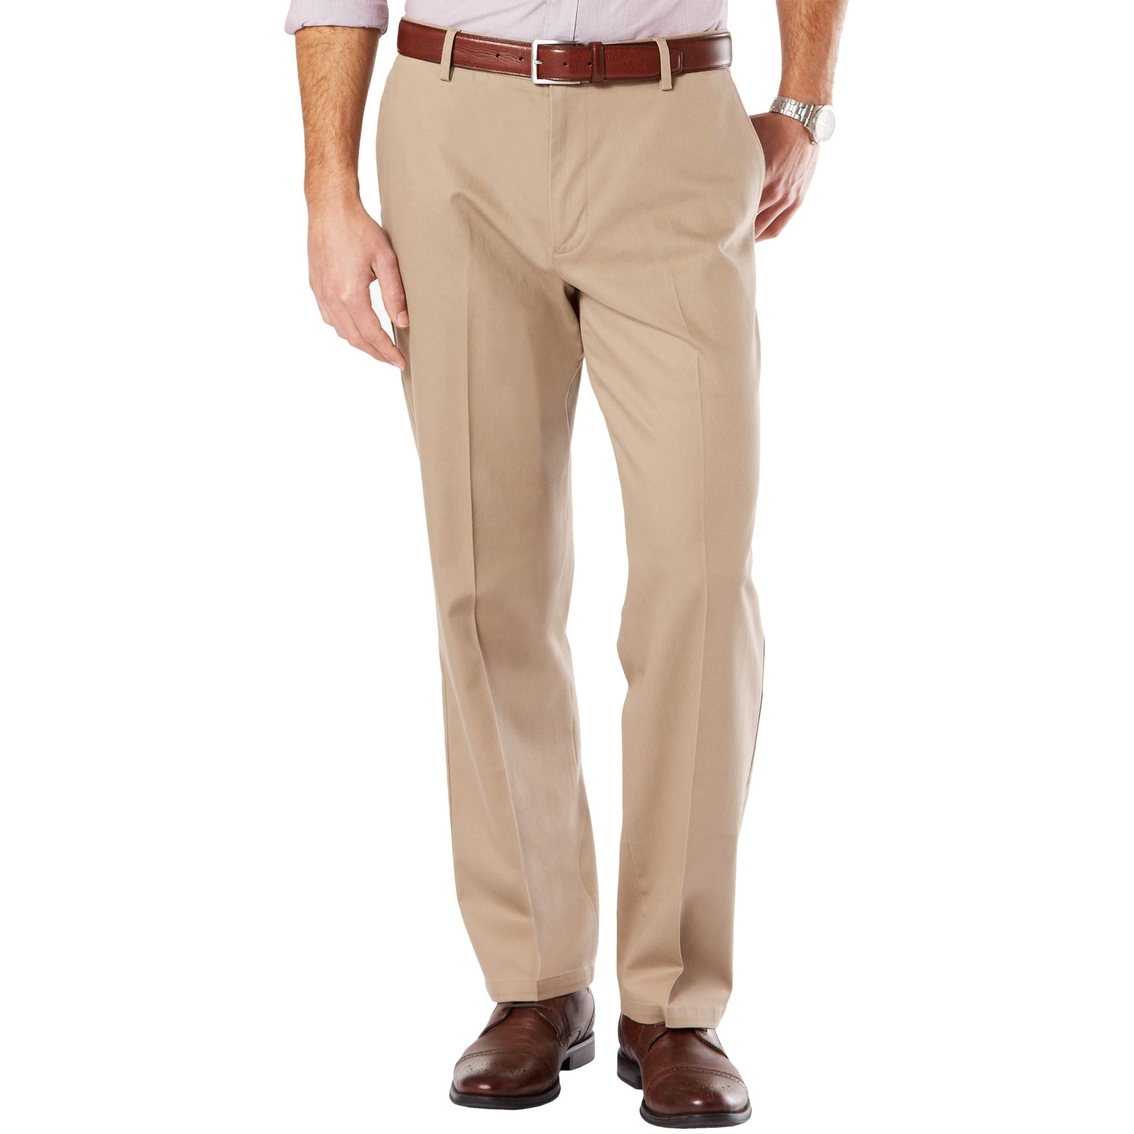 Dockers Signature Stretch Khaki Relaxed Fit Pants | Pants | Clothing ...